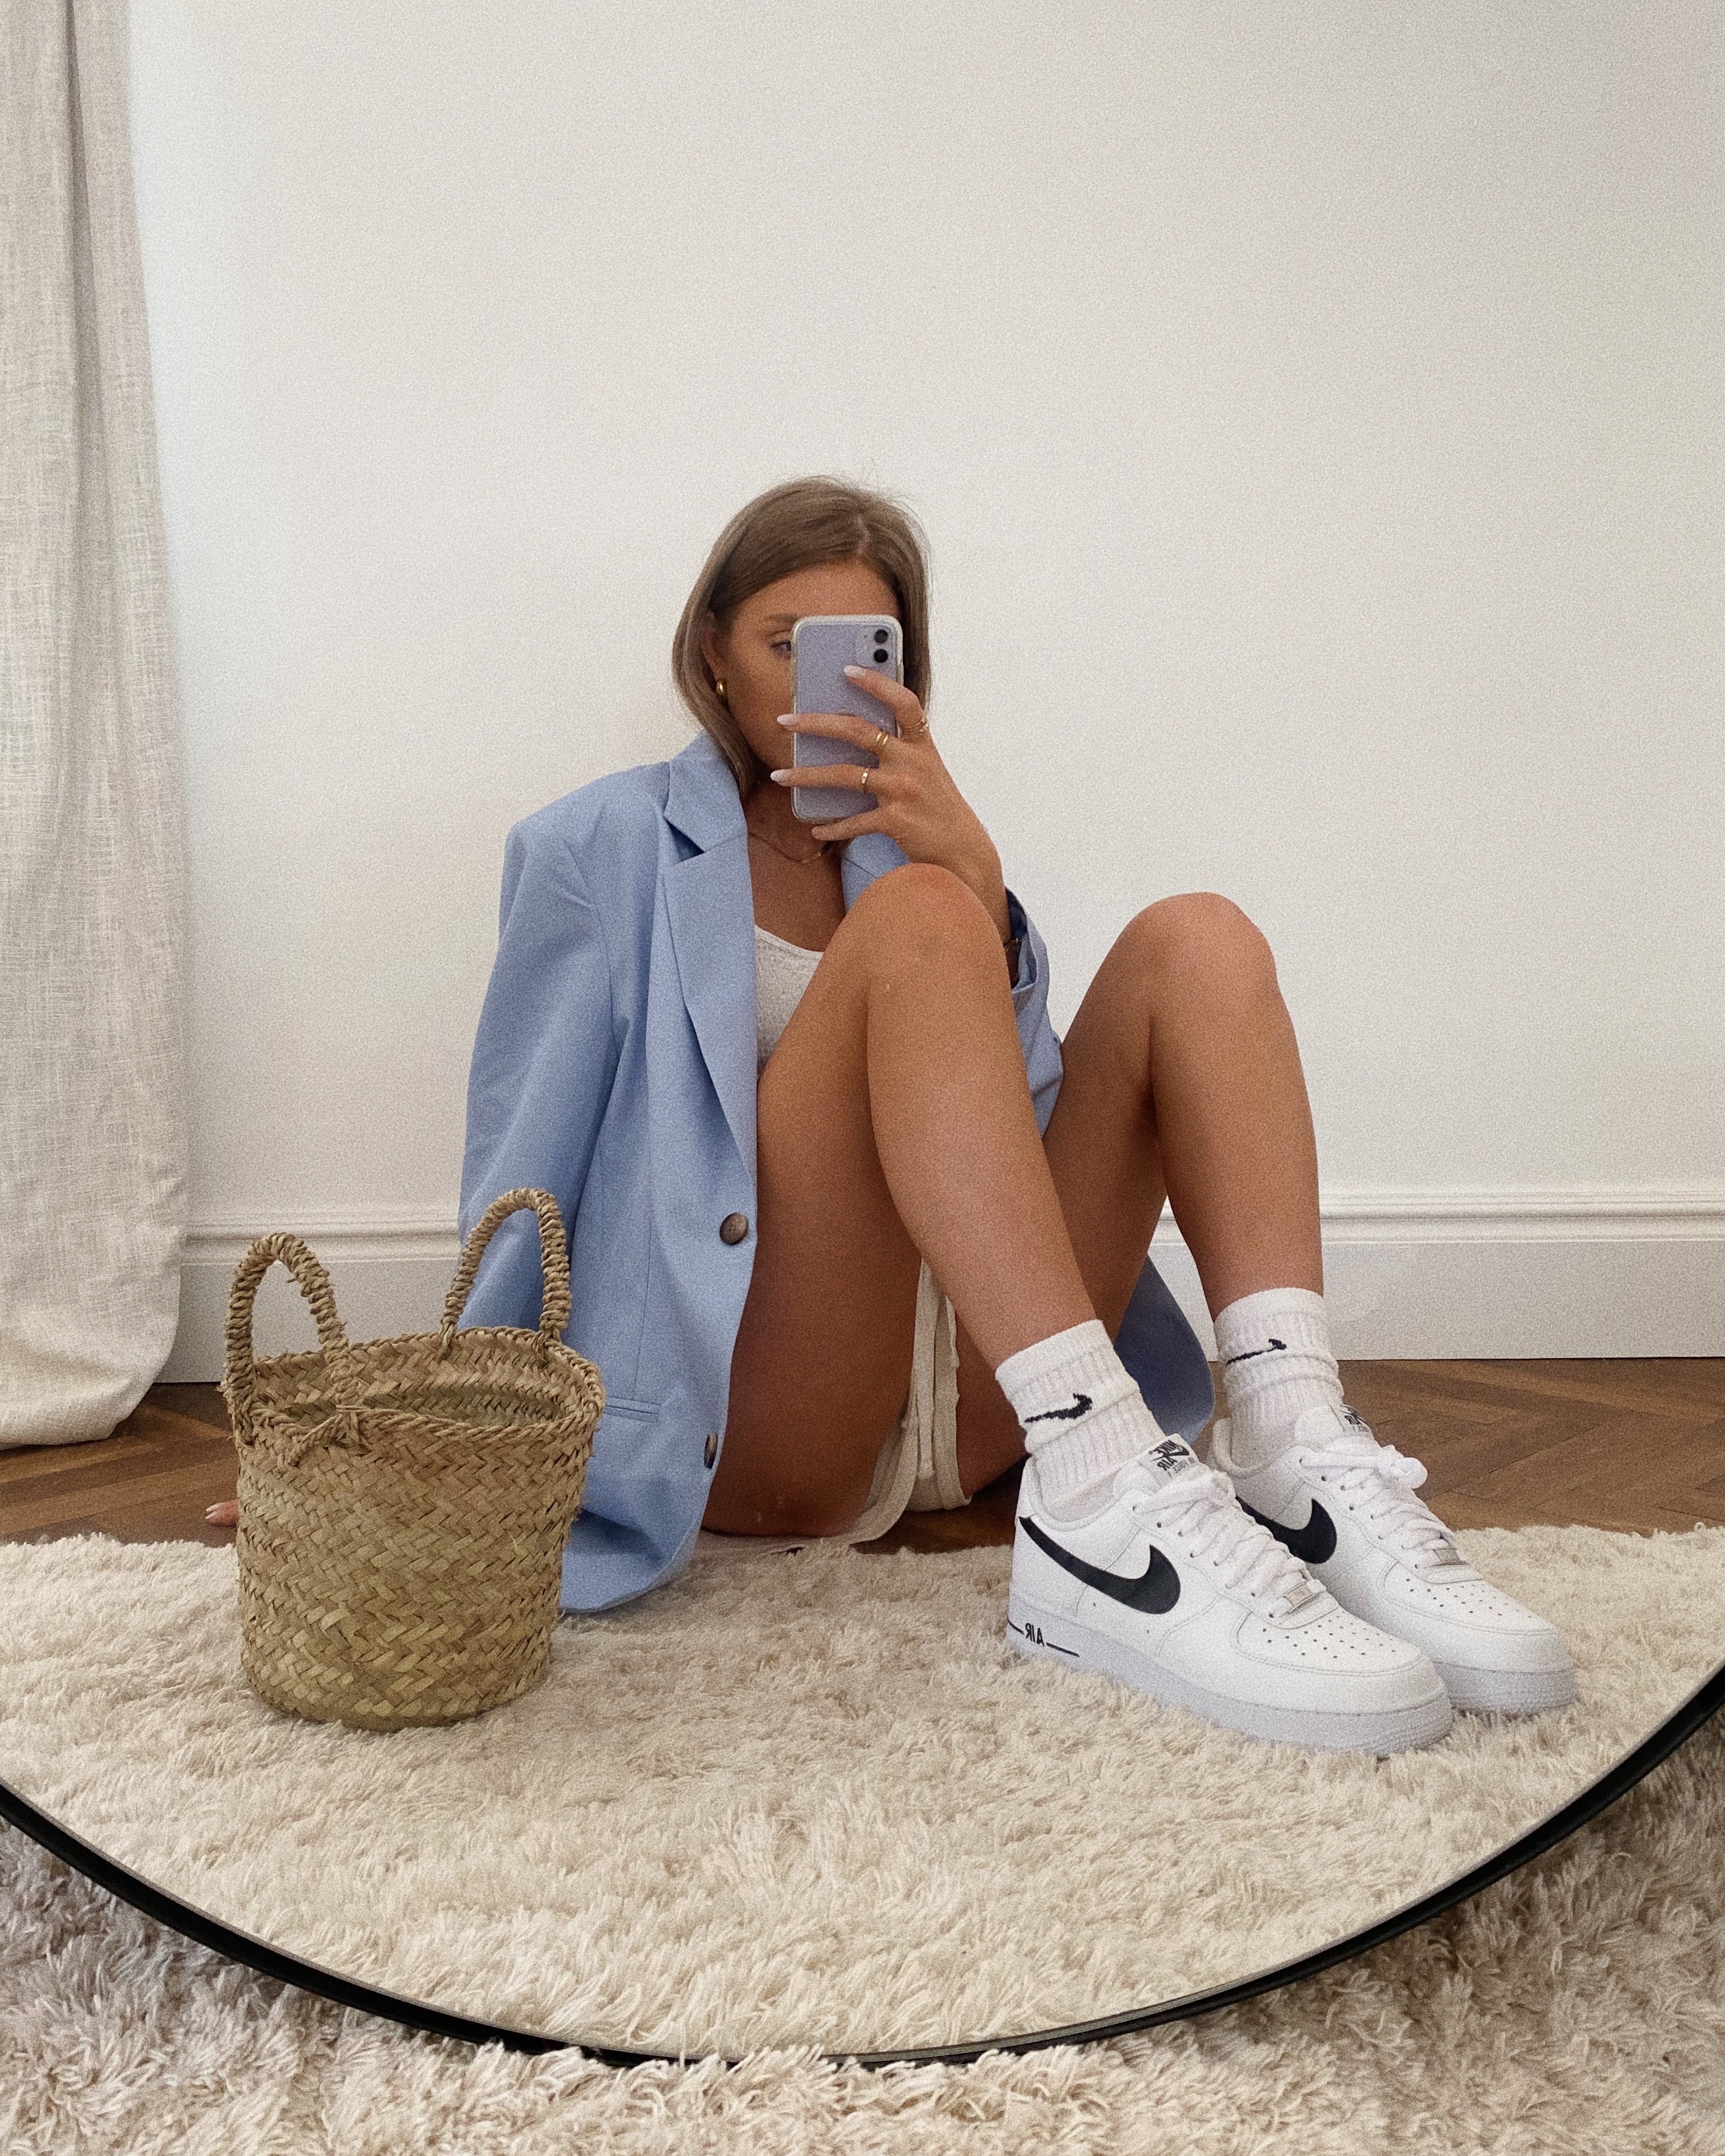 DIOR x NIKE AIR FORCE 1  Nike air force, Nike air force 1 outfit